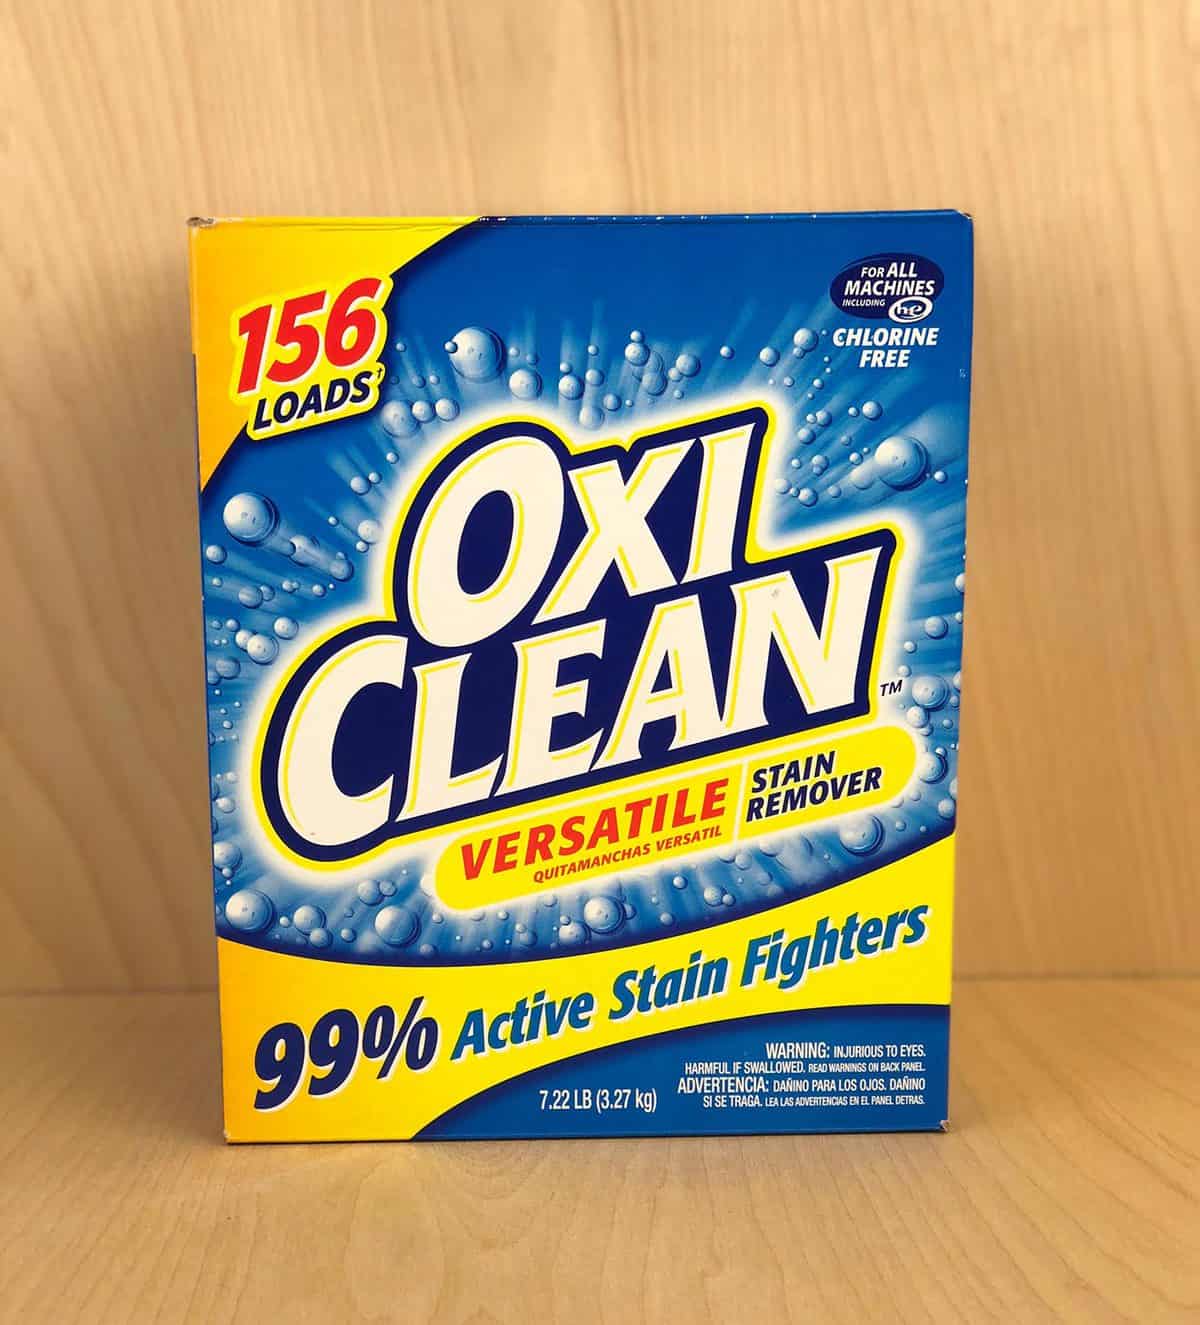  Box of OxiClean Laundry detergent